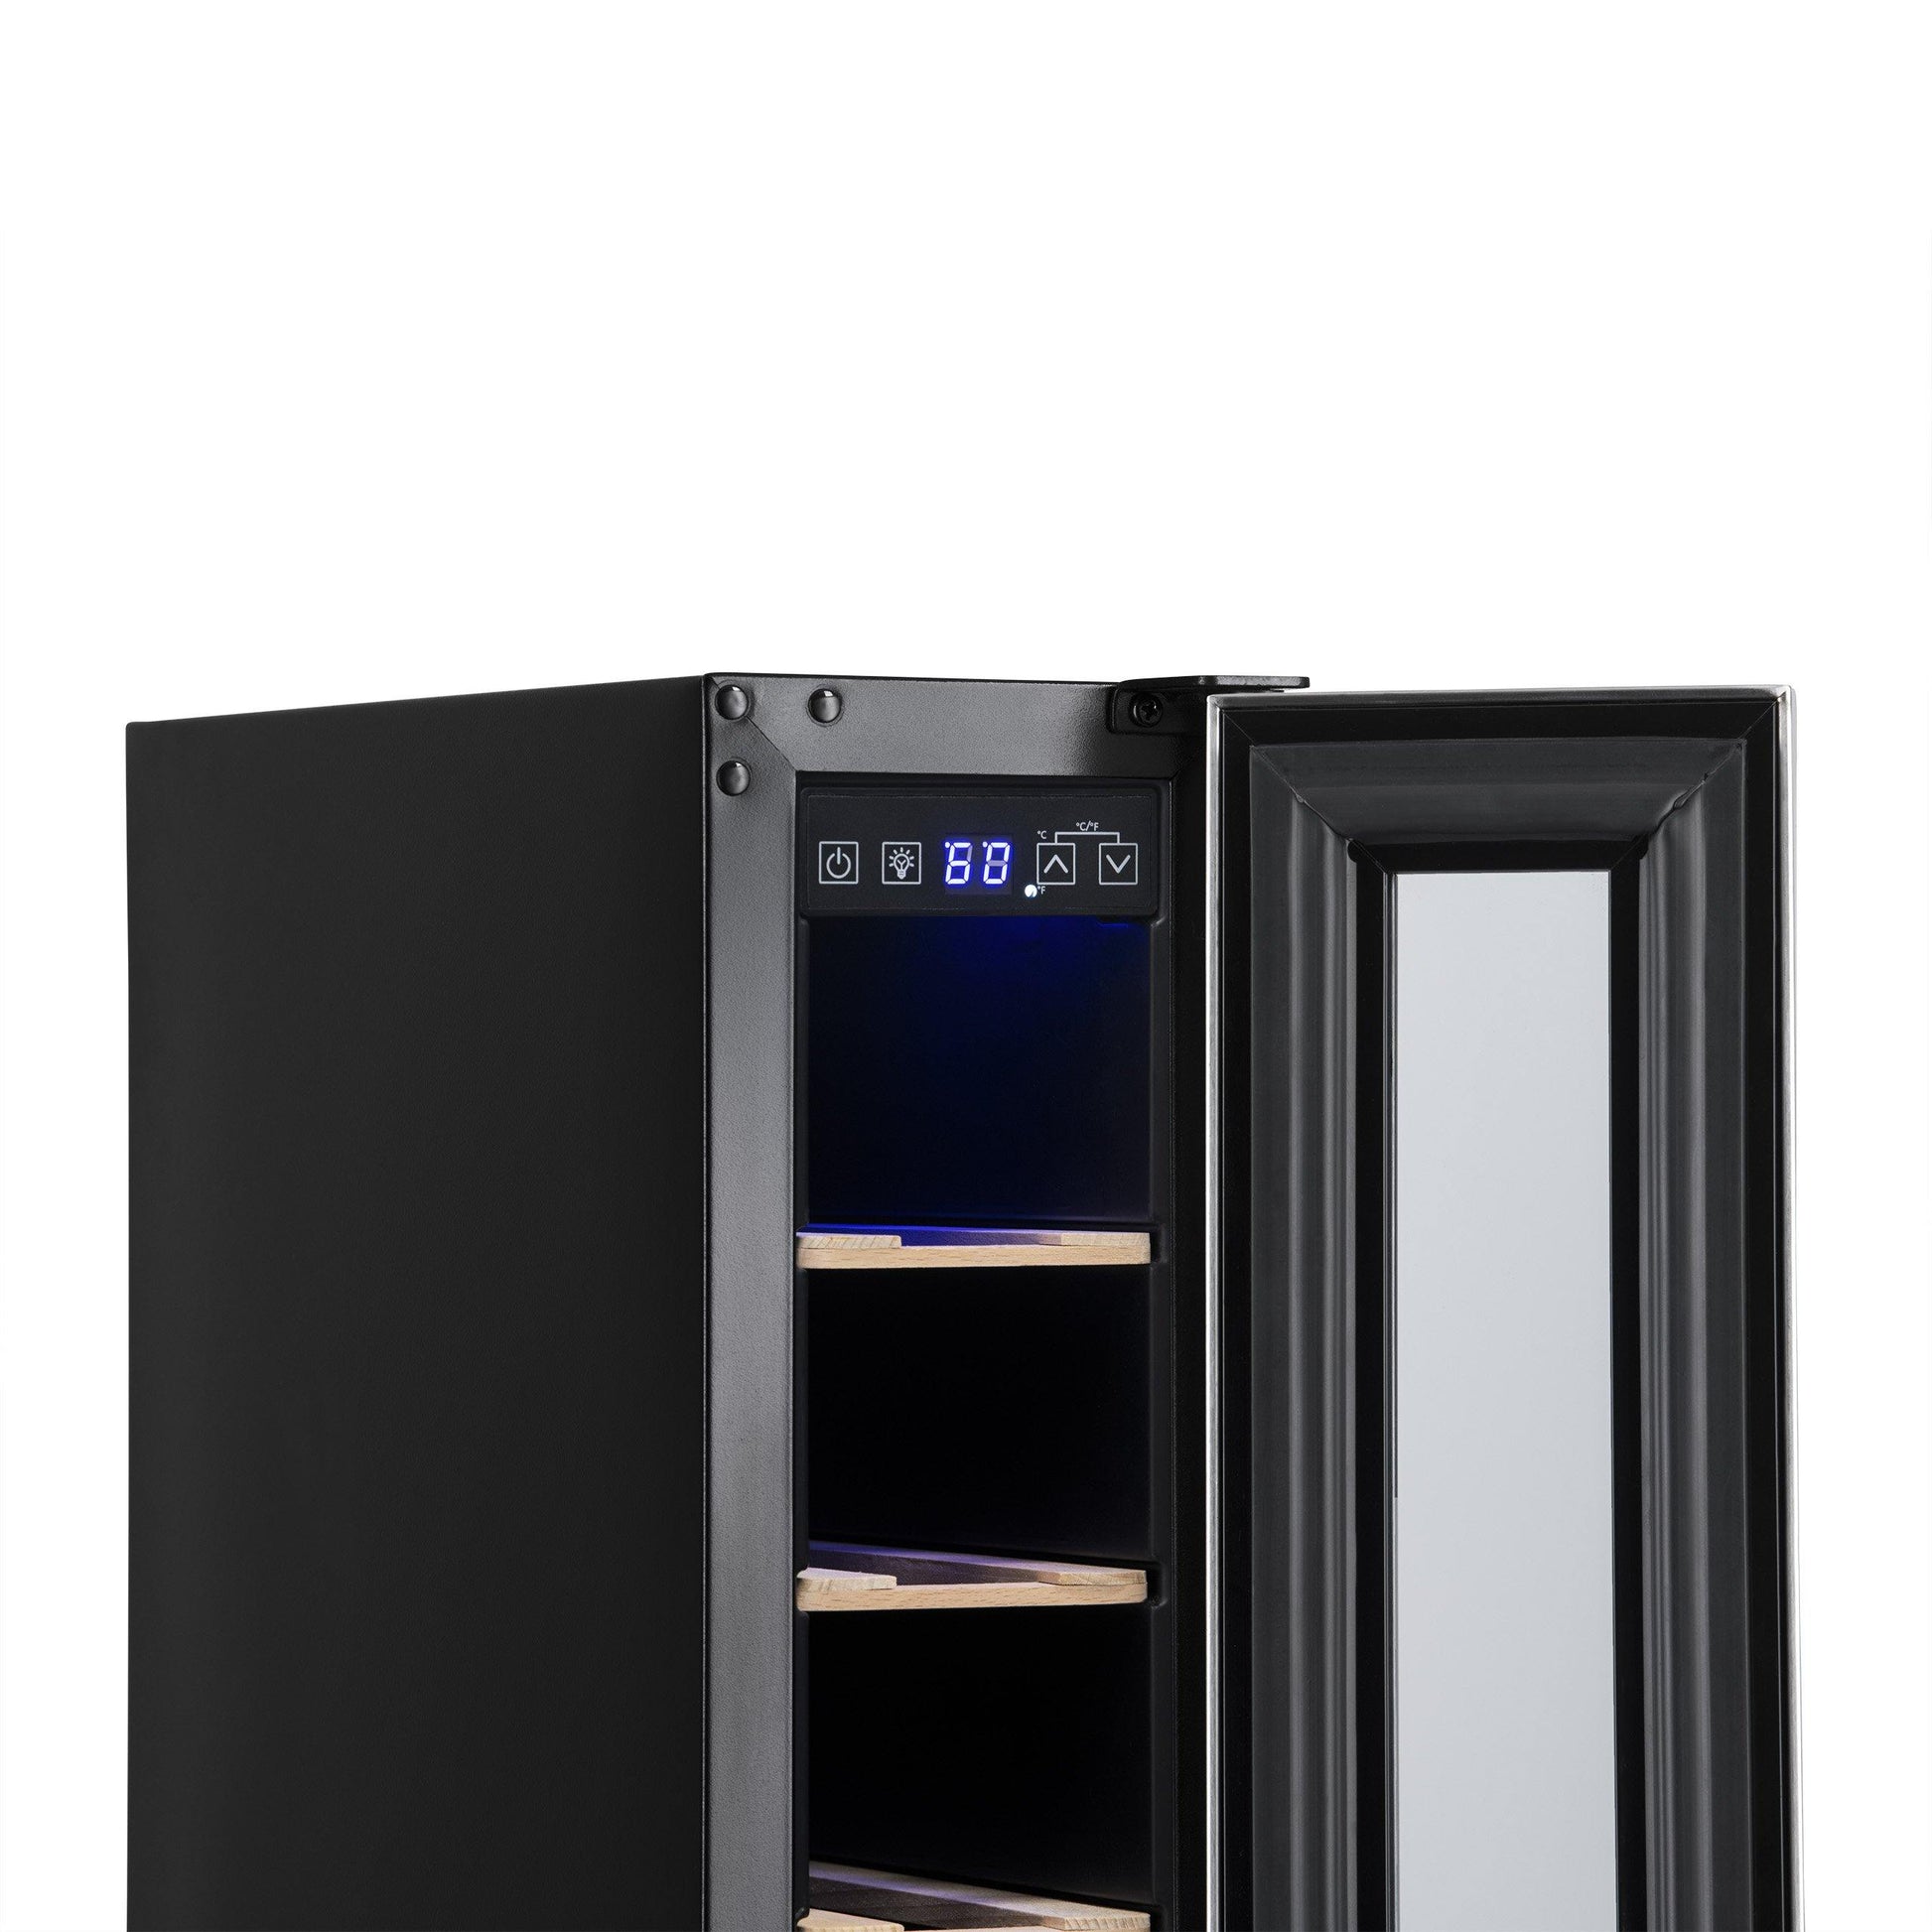 Newair 6" Built-In 7 Bottle Compressor Wine Fridge in Stainless Steel, Compact Size with Precision Digital Thermostat and Premium Beech Wood Shelves-Wine Fridges-The Wine Cooler Club